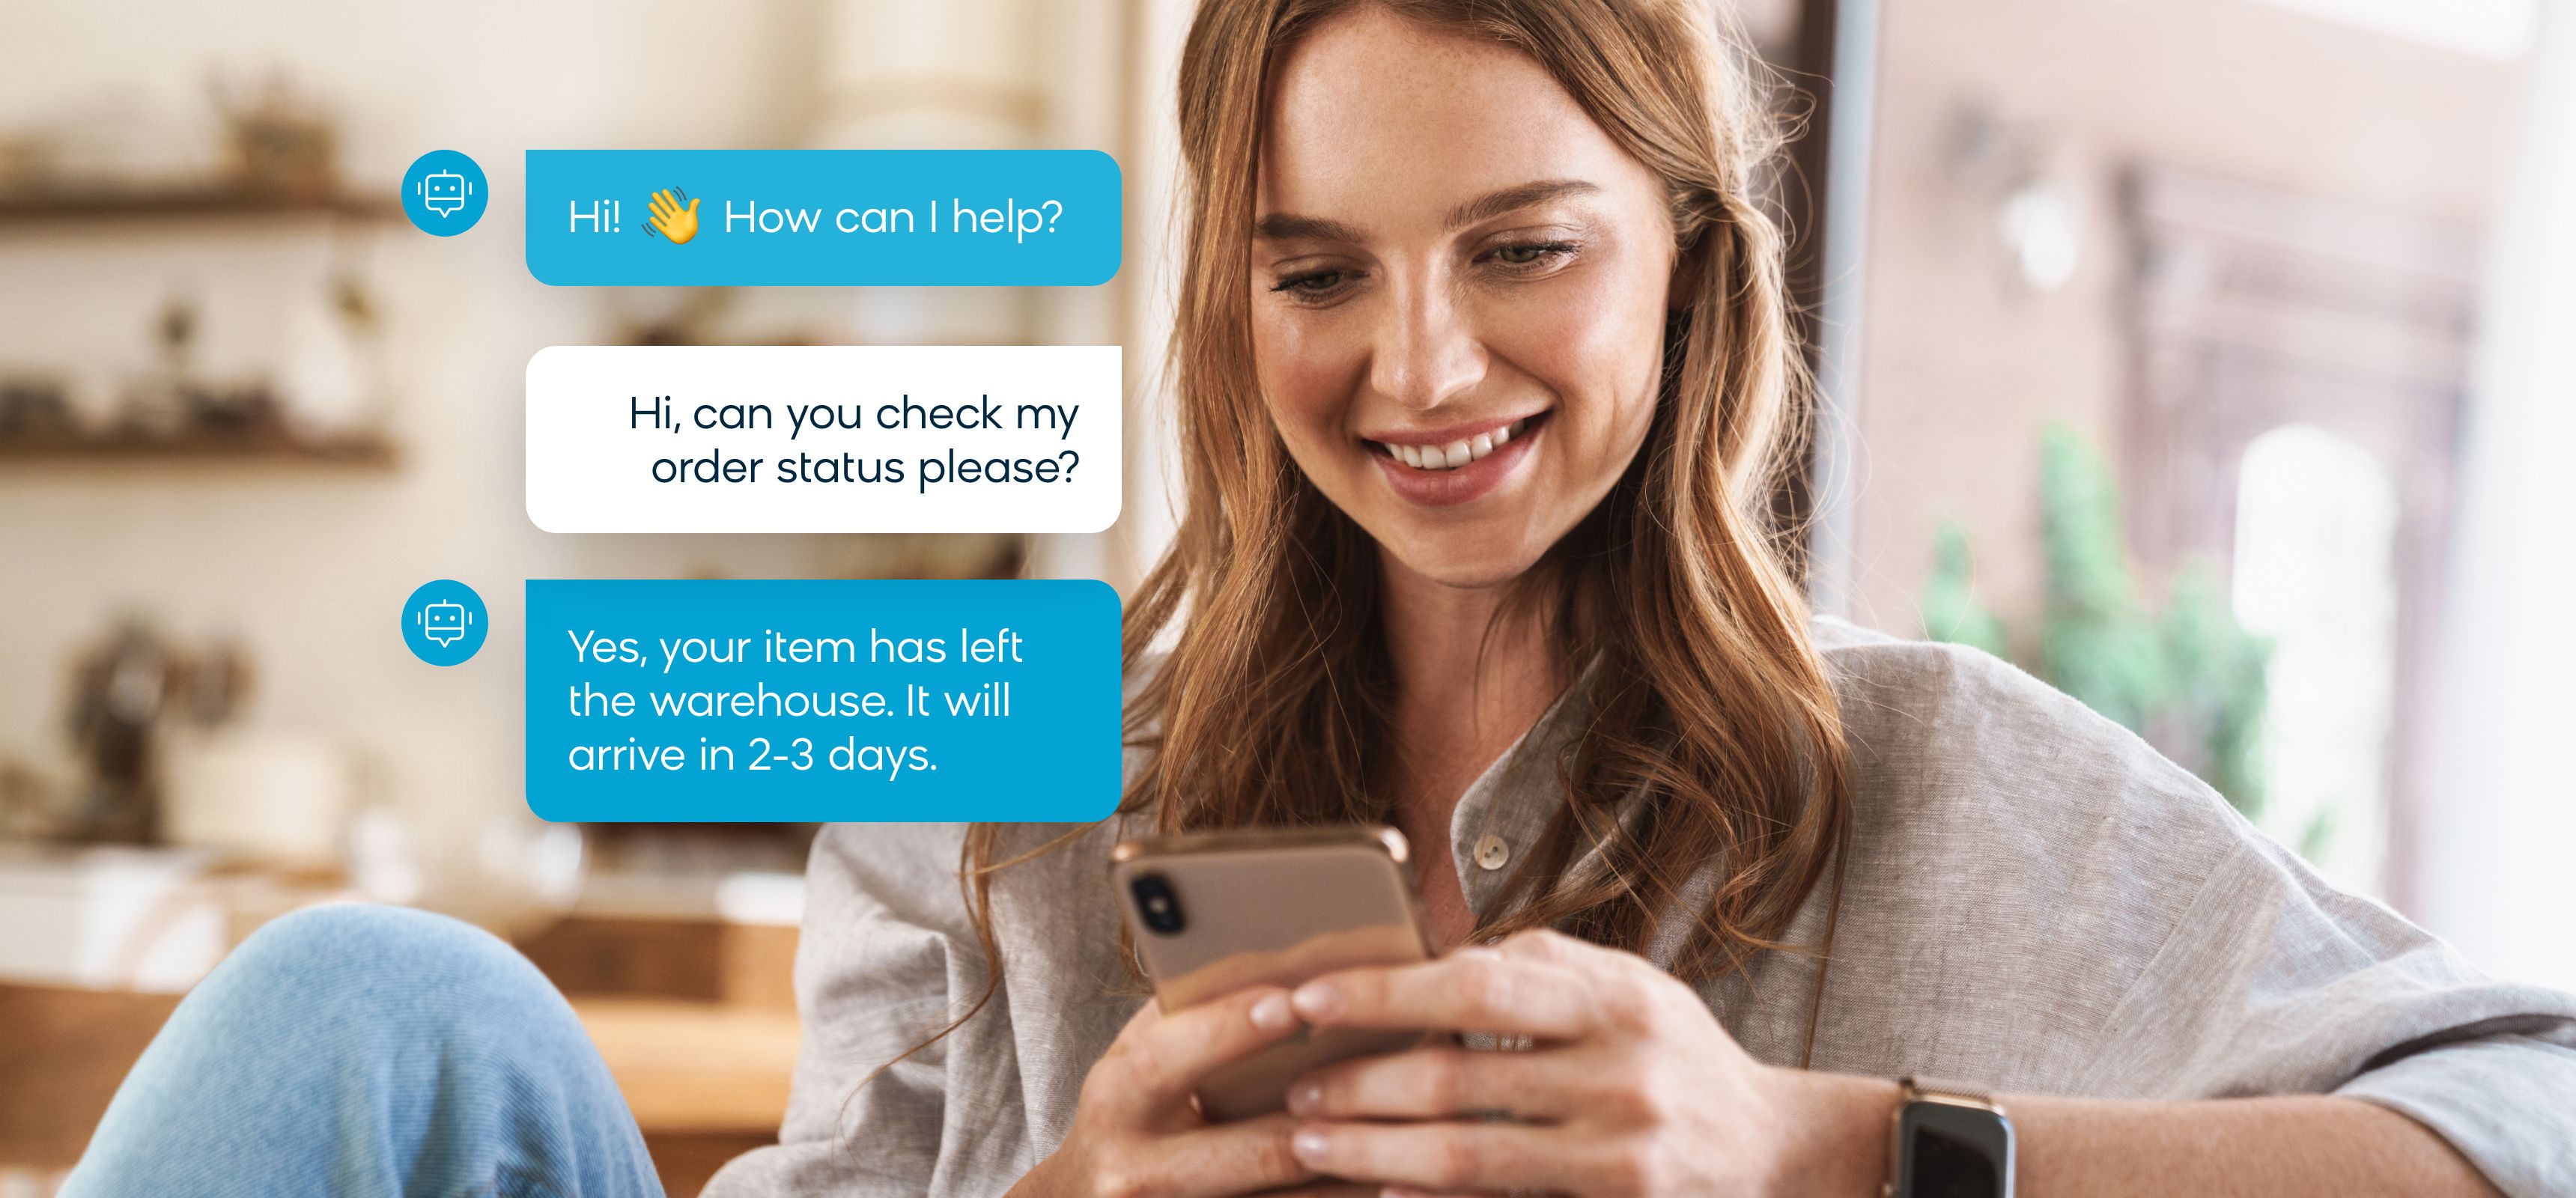 Example of AI chatbot helping a customer